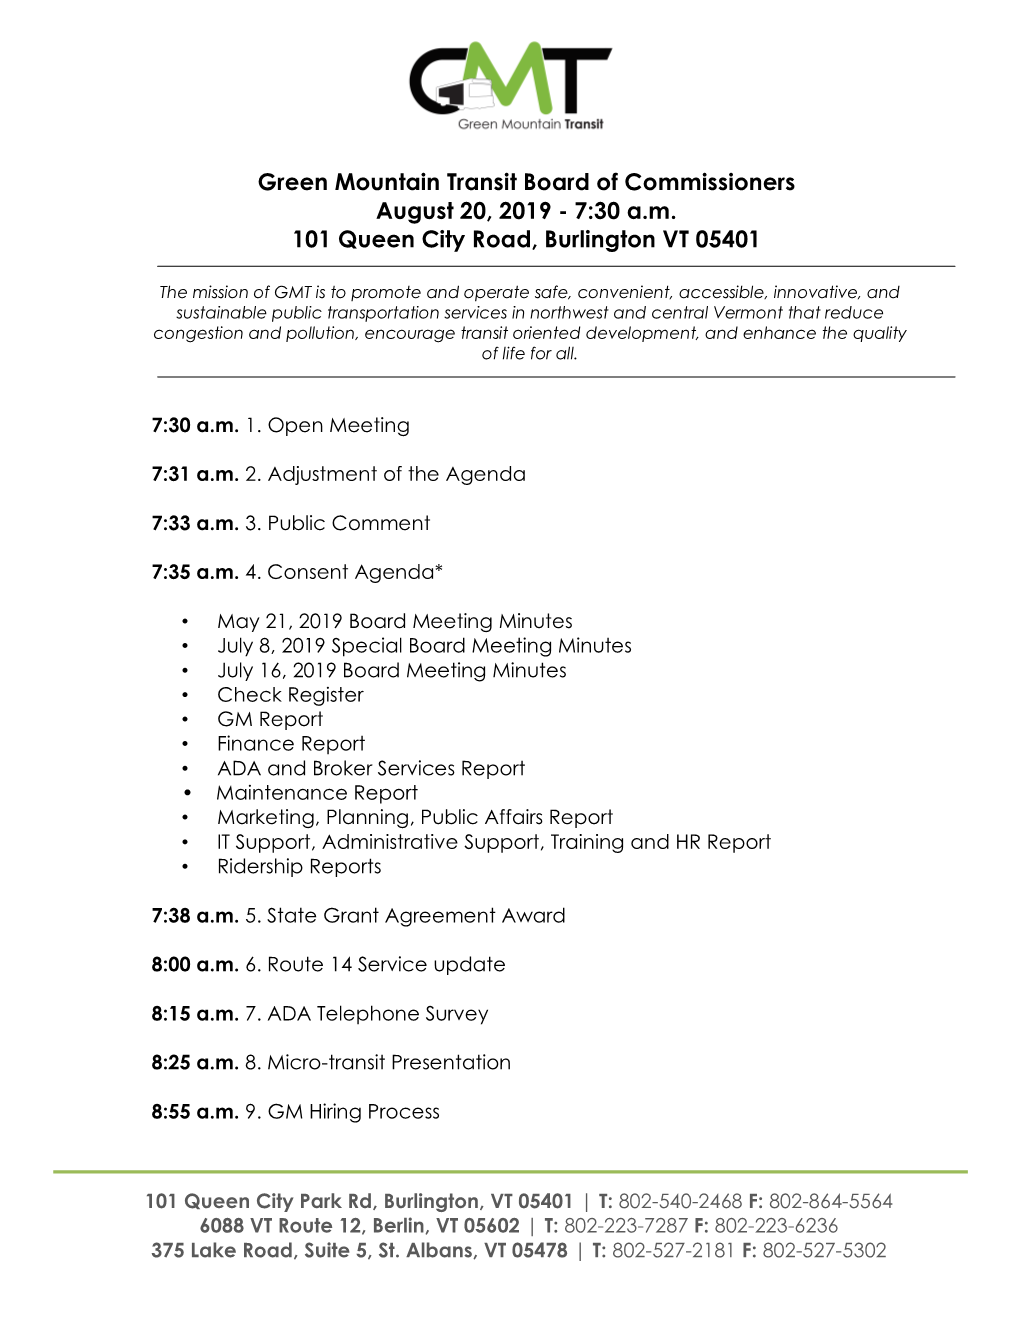 Green Mountain Transit Board of Commissioners August 20, 2019 - 7:30 A.M